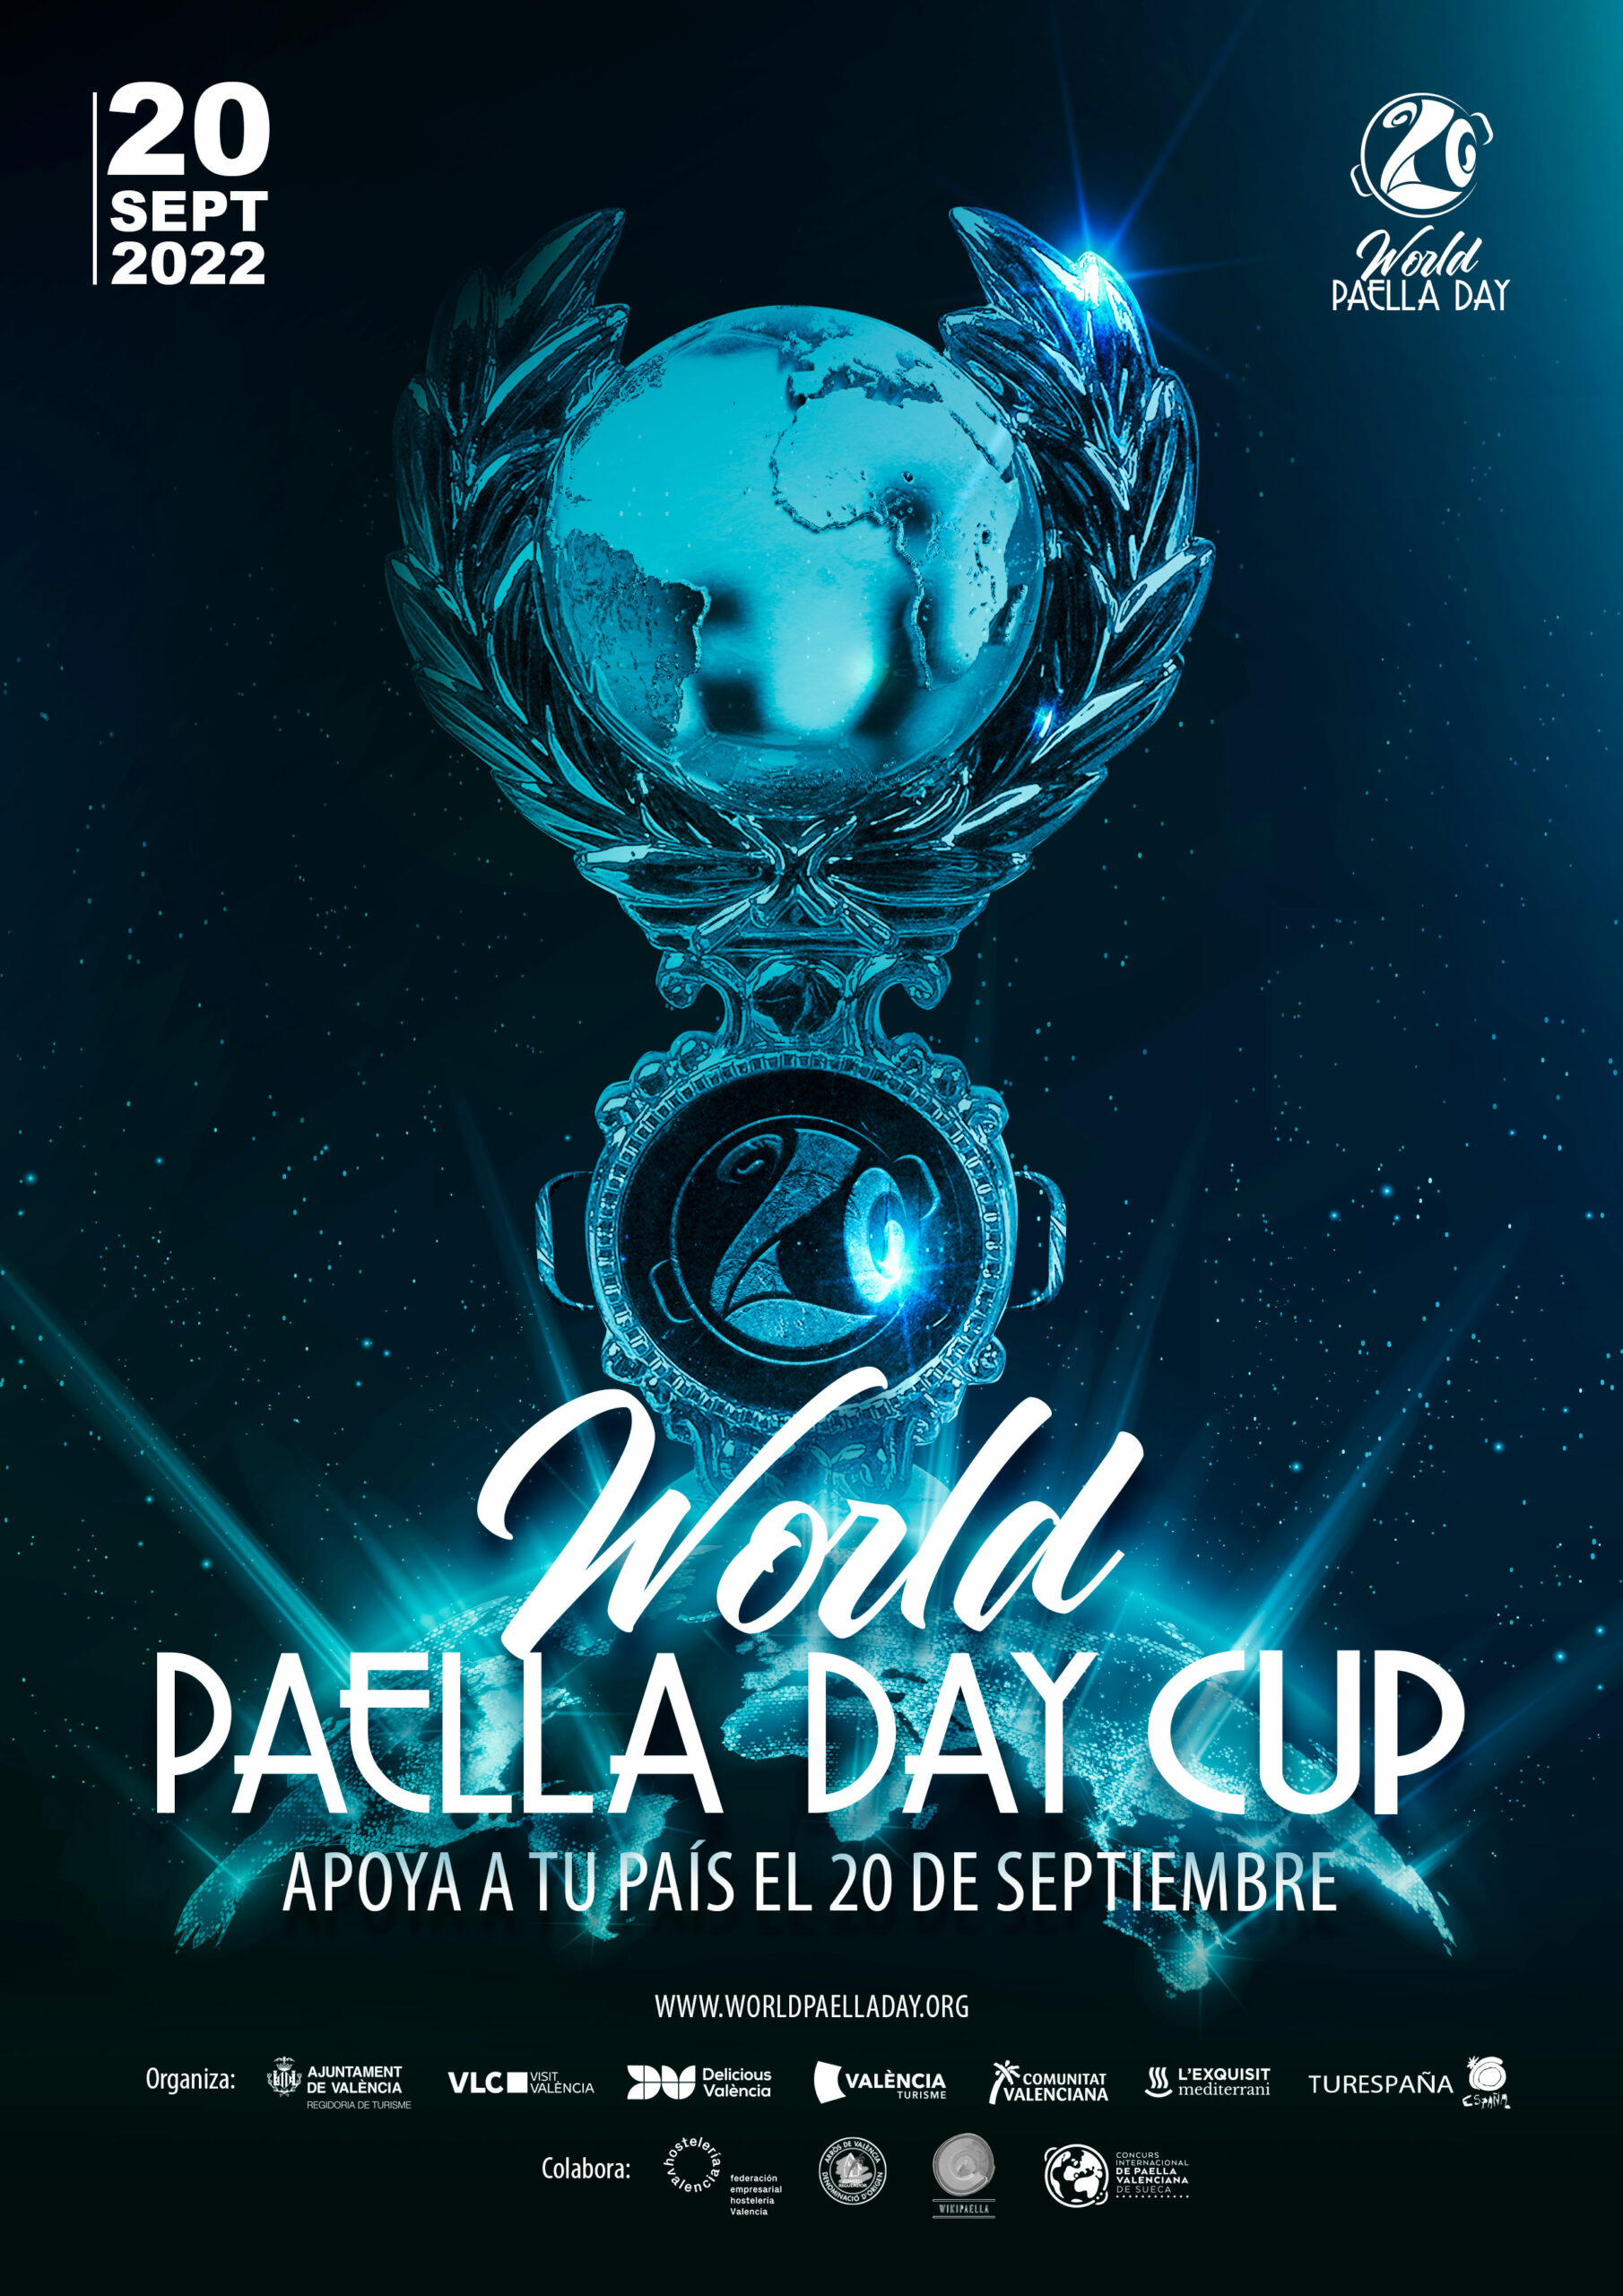 WORLD_PAELLA_DAY_CUP